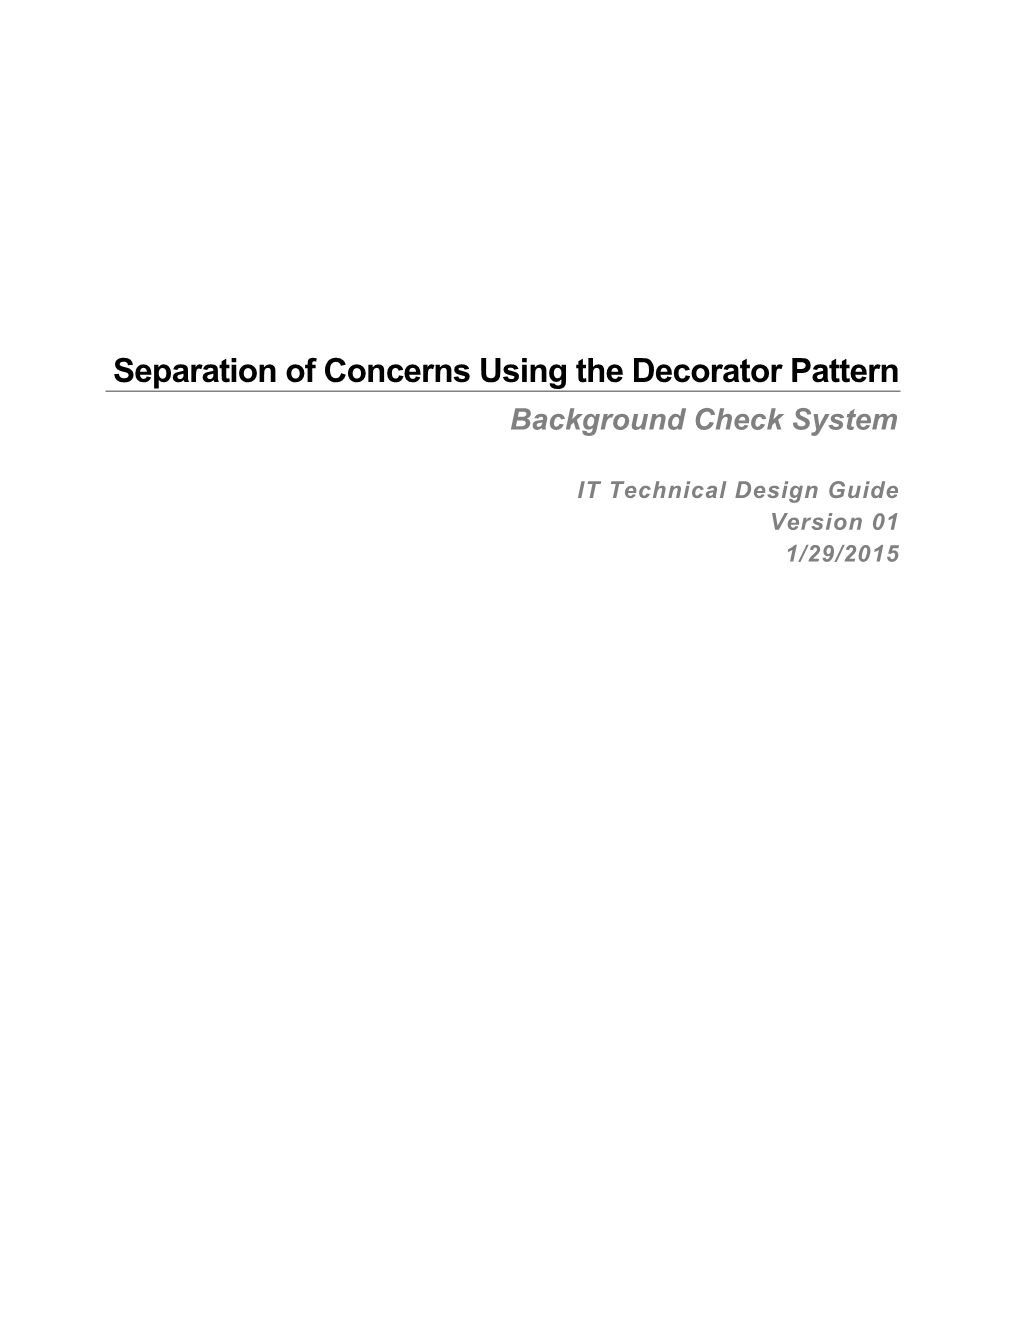 Separation of Concerns Using the Decorator Pattern